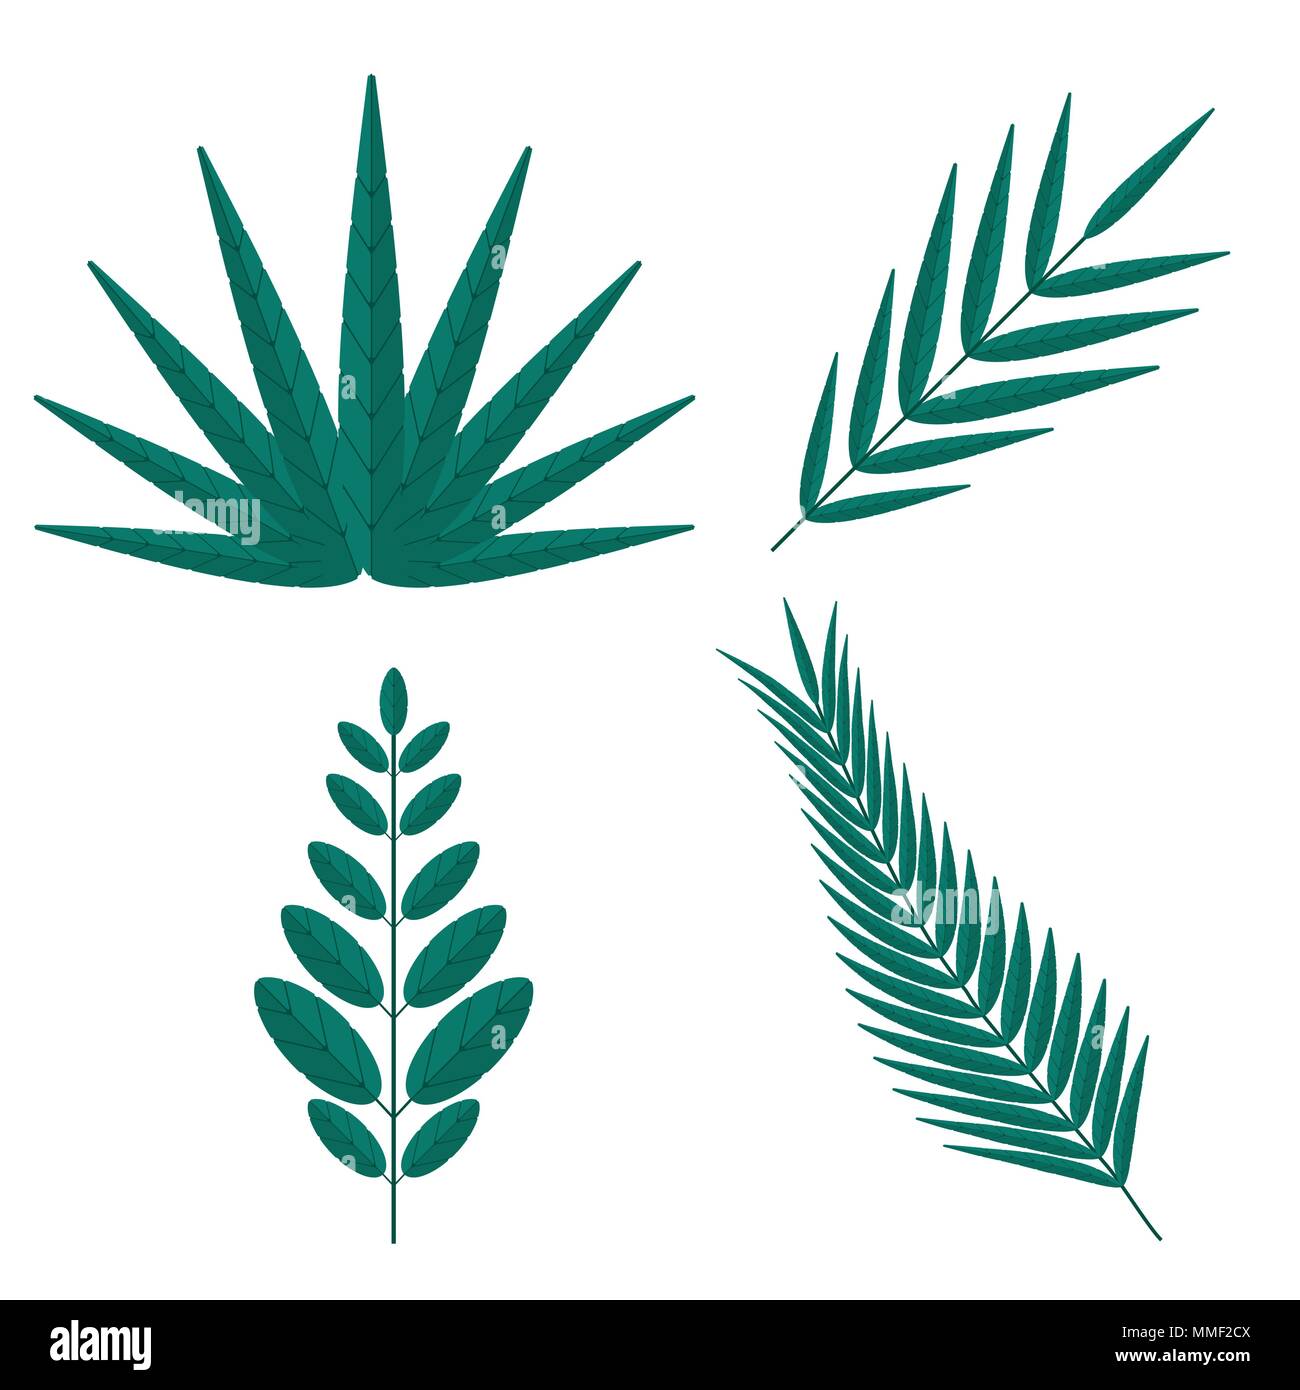 Tropical palm tree branches Stock Vector